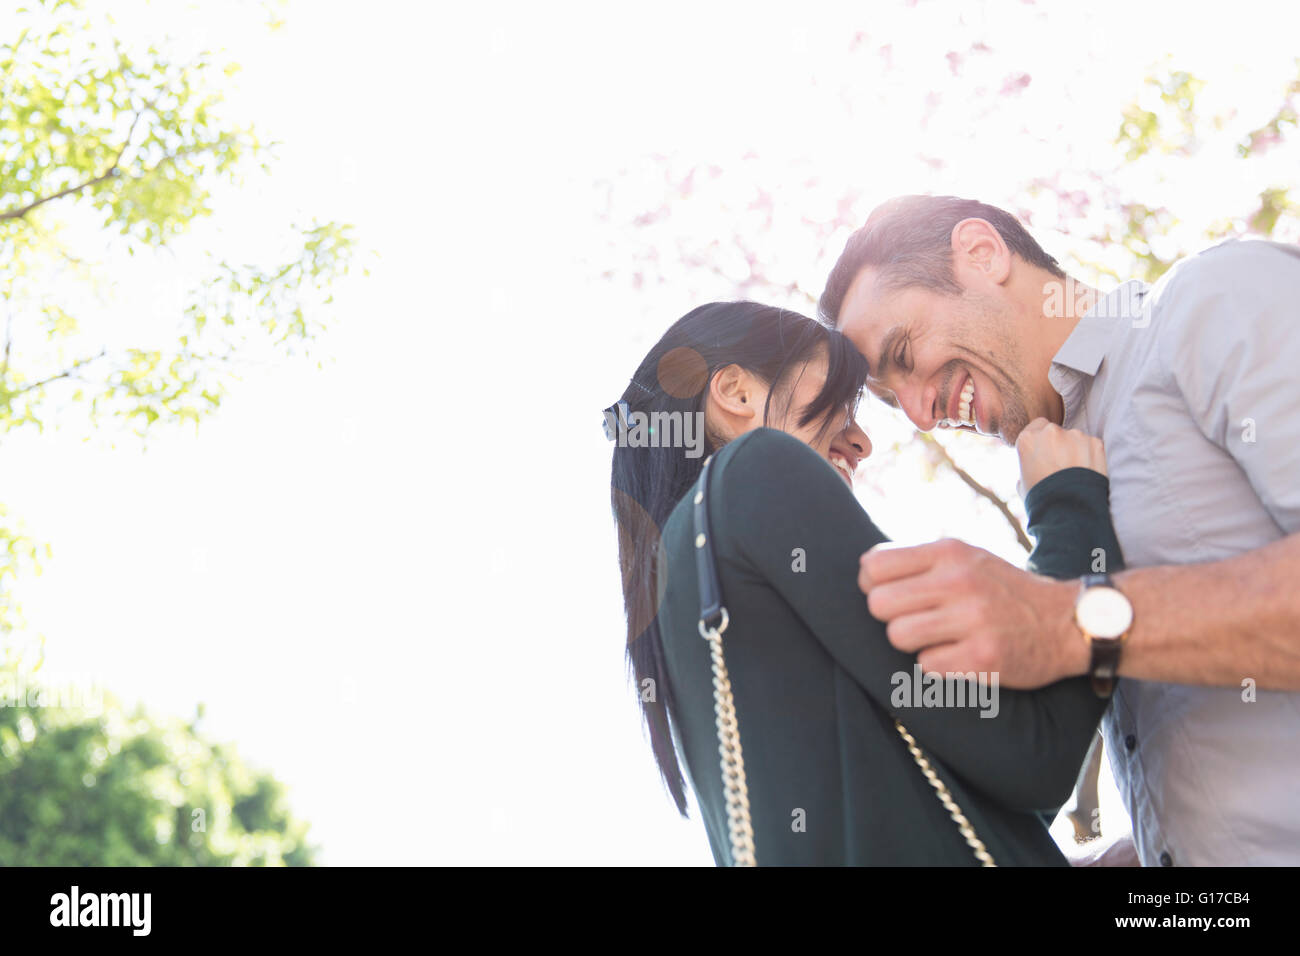 Low angle view of couple face to face smiling Stock Photo